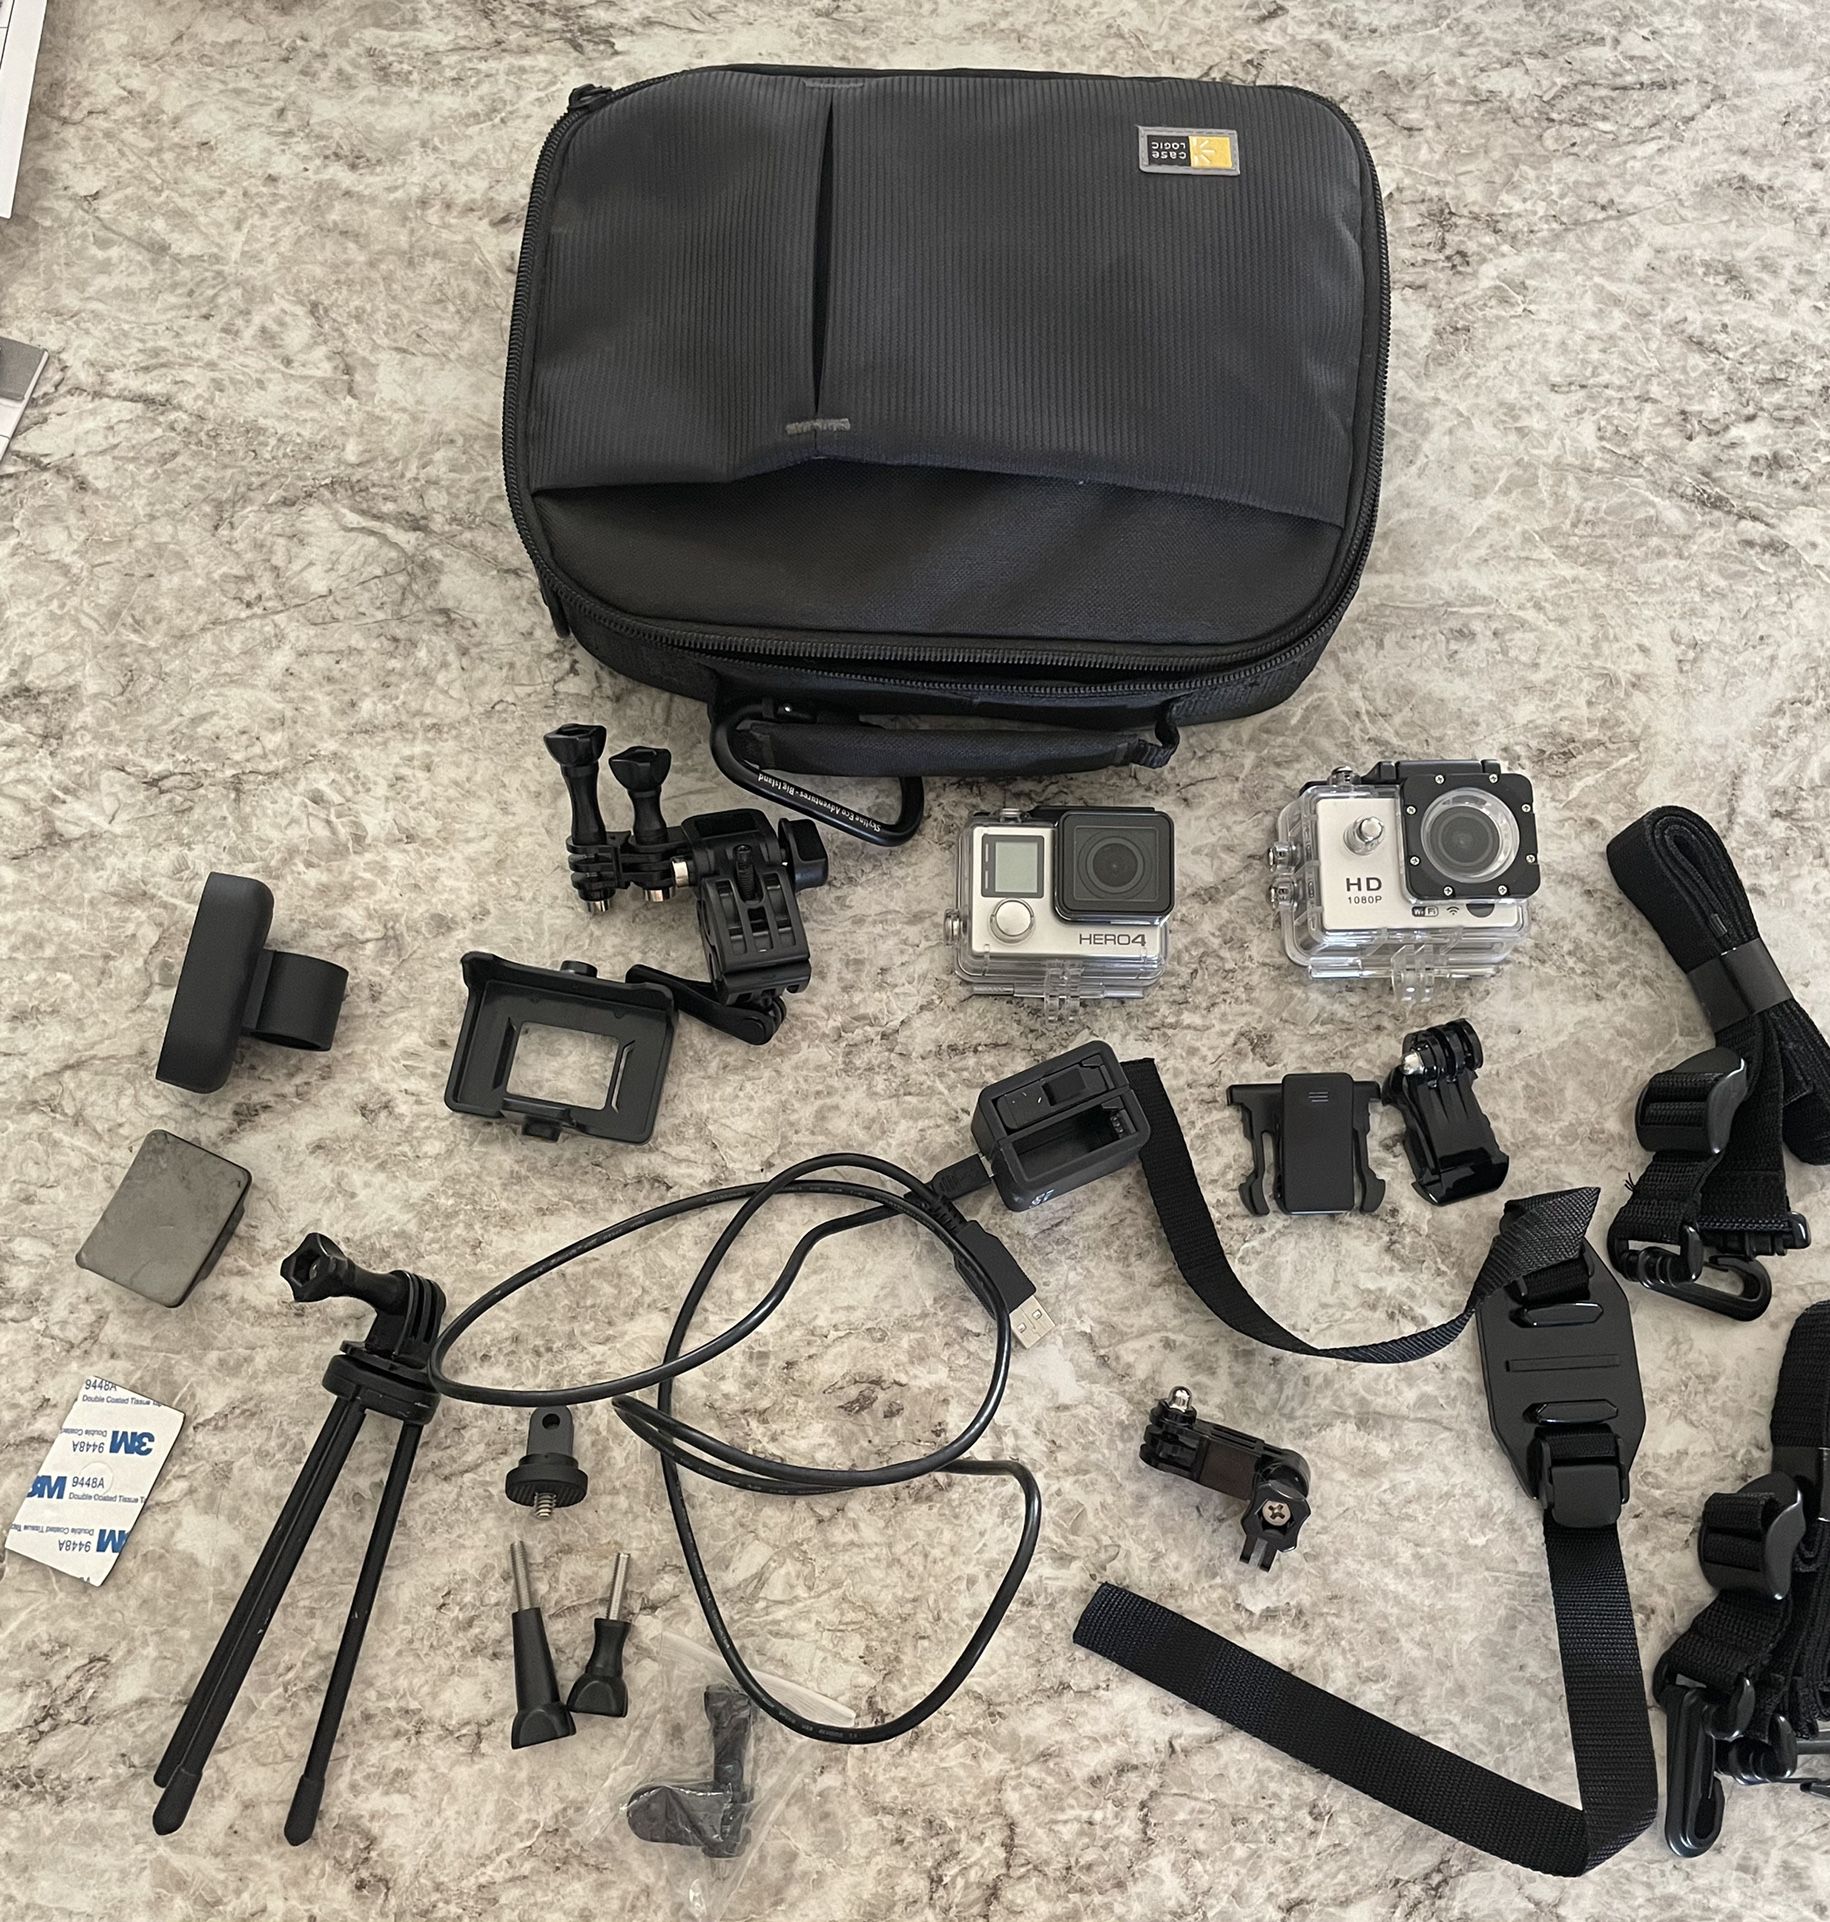 Go Pro Hero silver, Additional Camera, Cases, and Acessories 